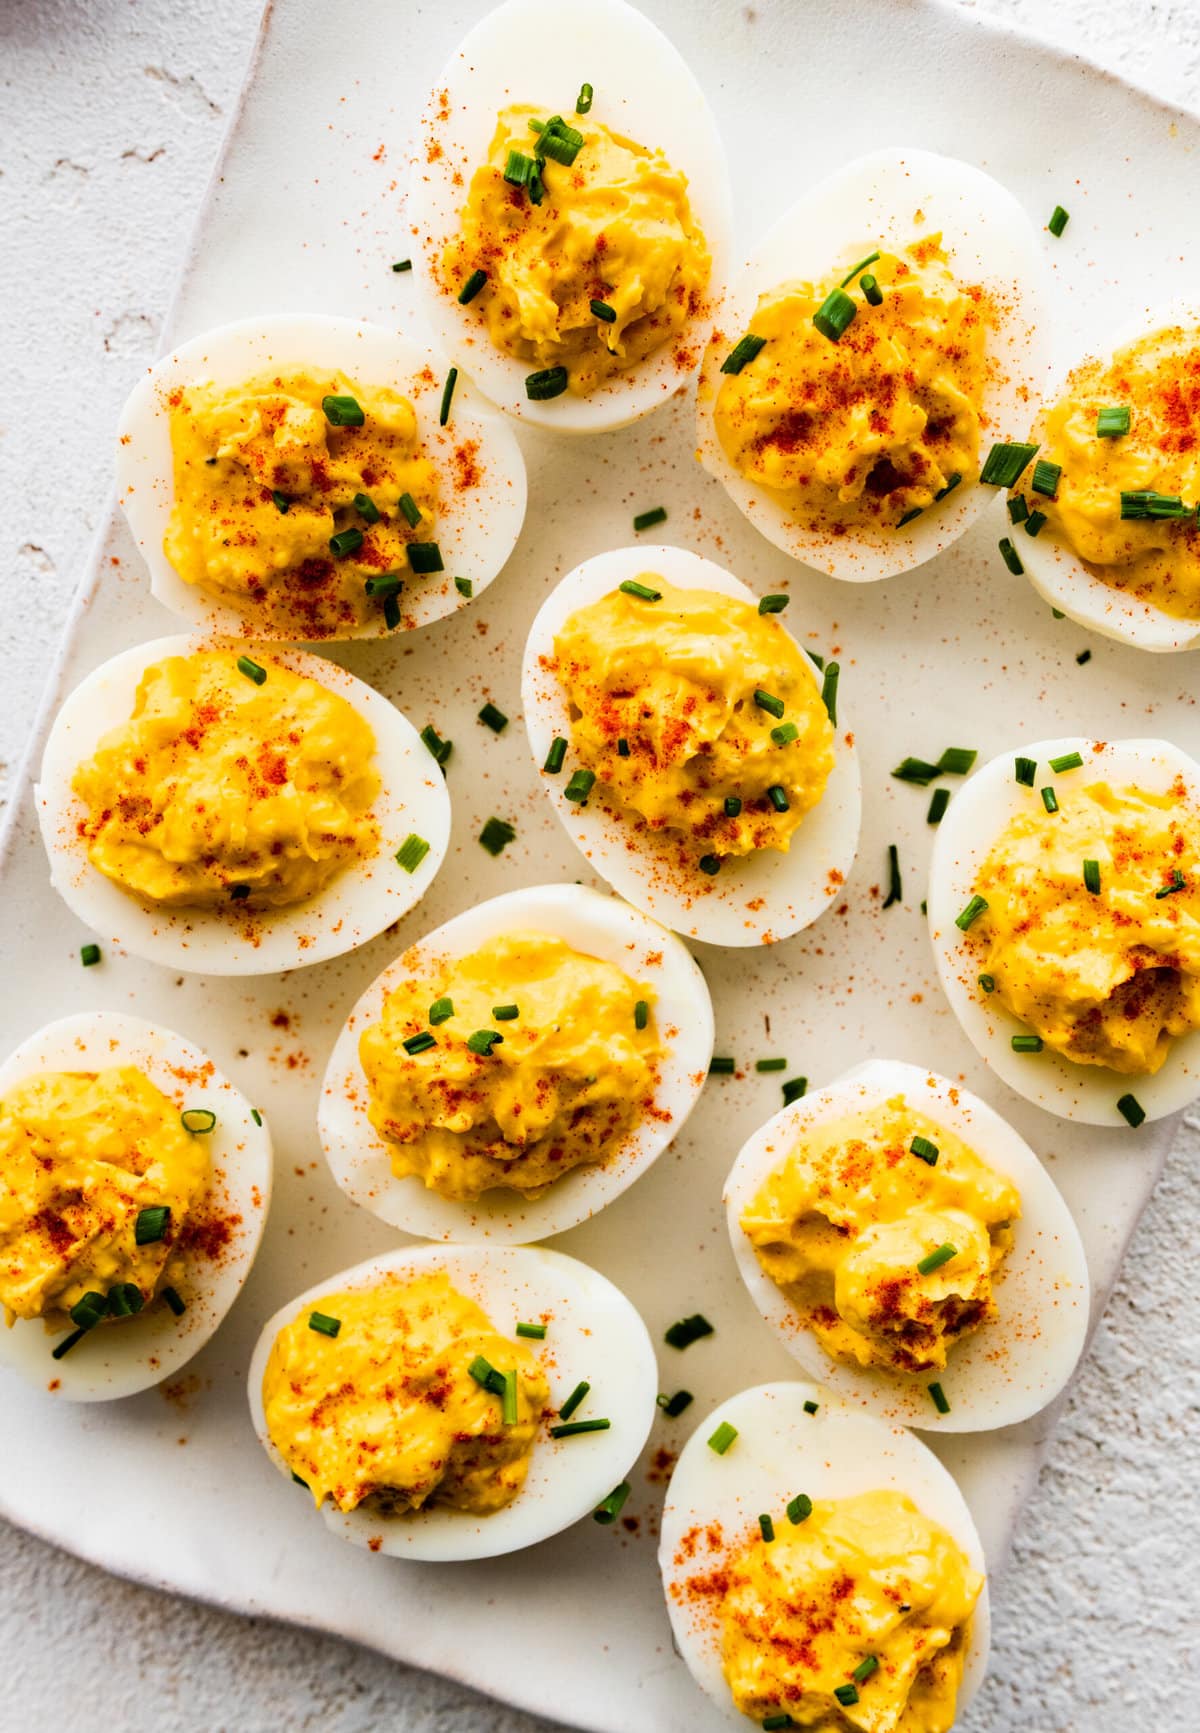 plate of deviled egg with paprika on top arranged on a plate with a few chives on top.